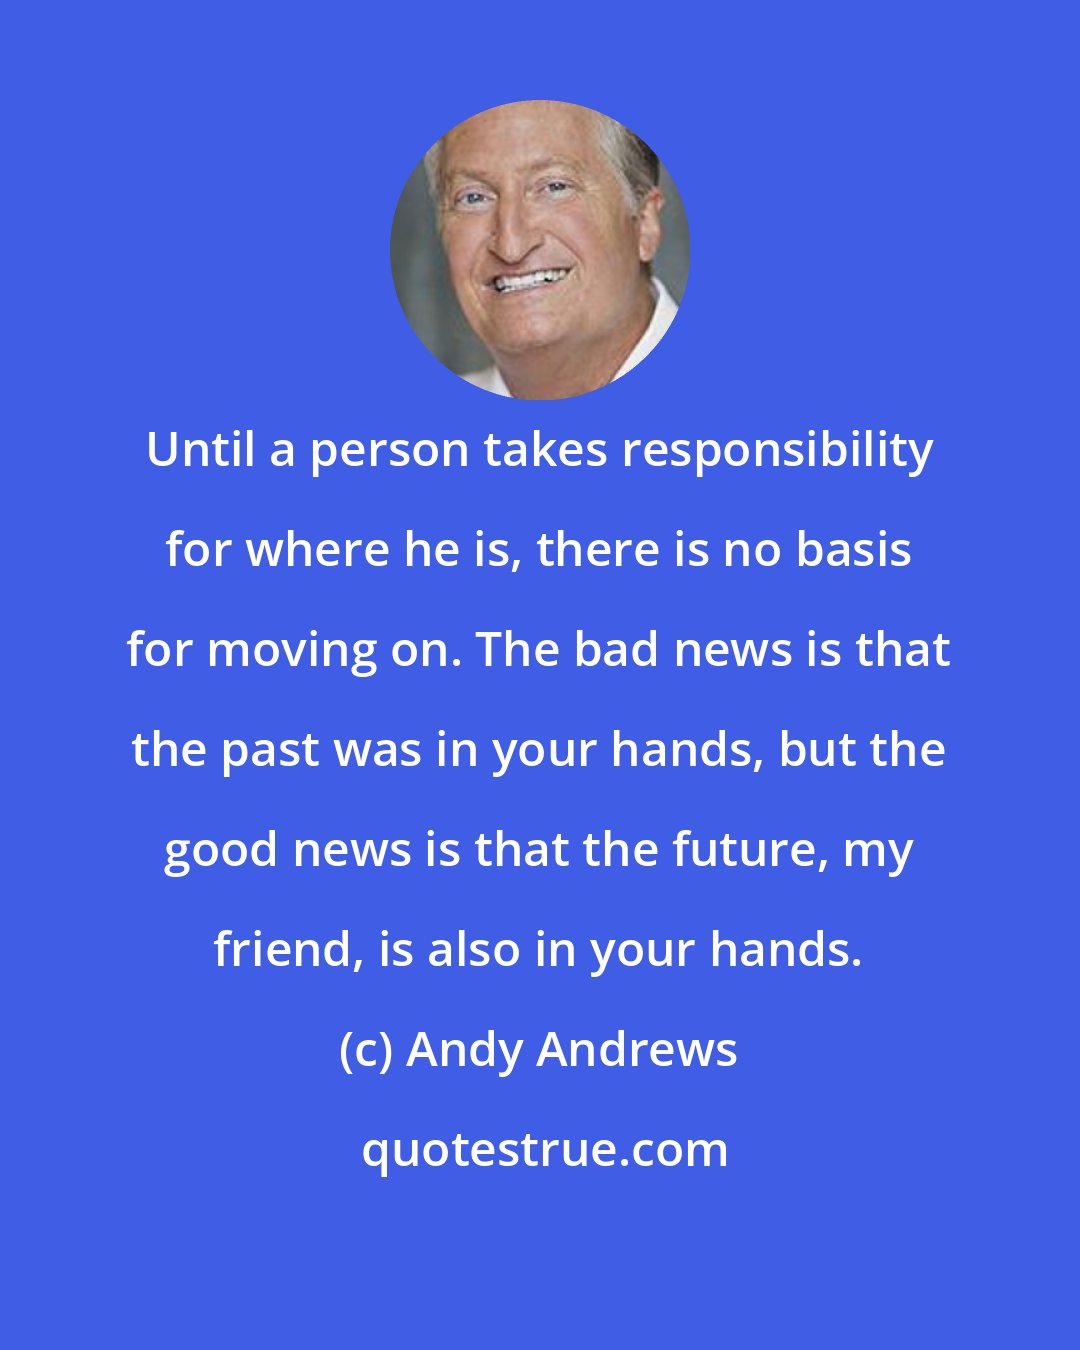 Andy Andrews: Until a person takes responsibility for where he is, there is no basis for moving on. The bad news is that the past was in your hands, but the good news is that the future, my friend, is also in your hands.